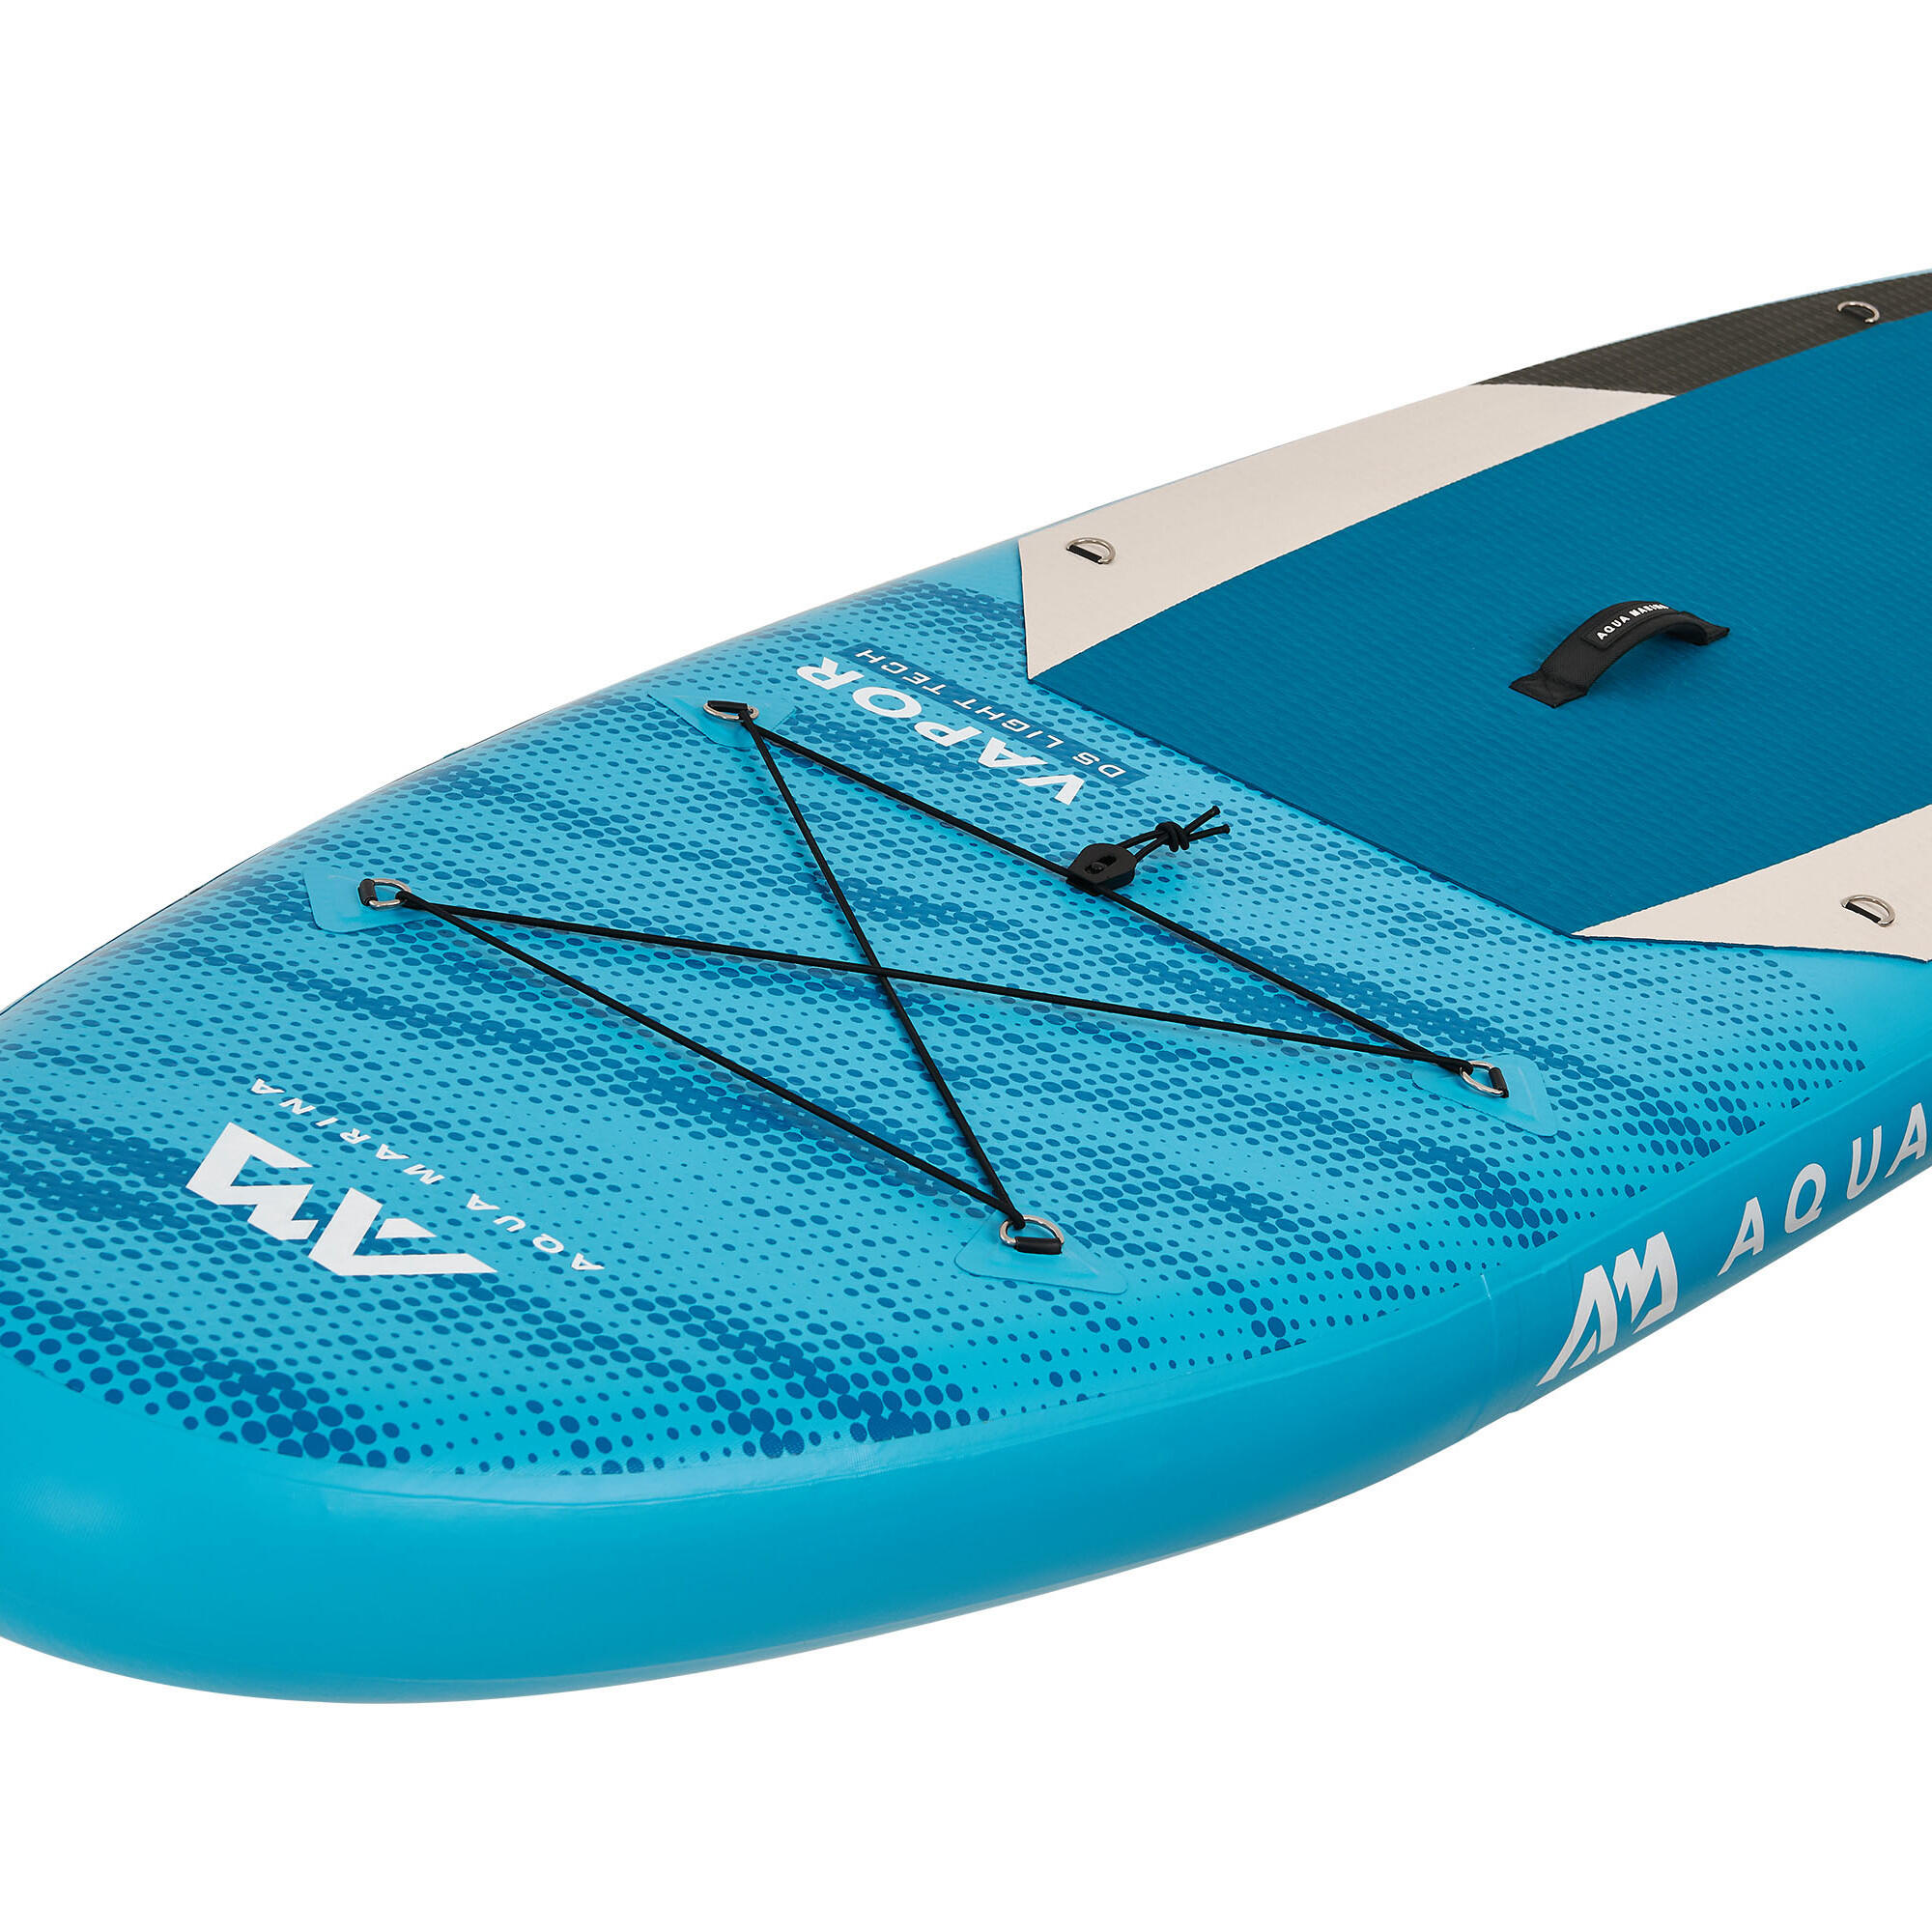 Aqua Marina Vapor stand-up paddle board package 10ft4/315cm 8/16